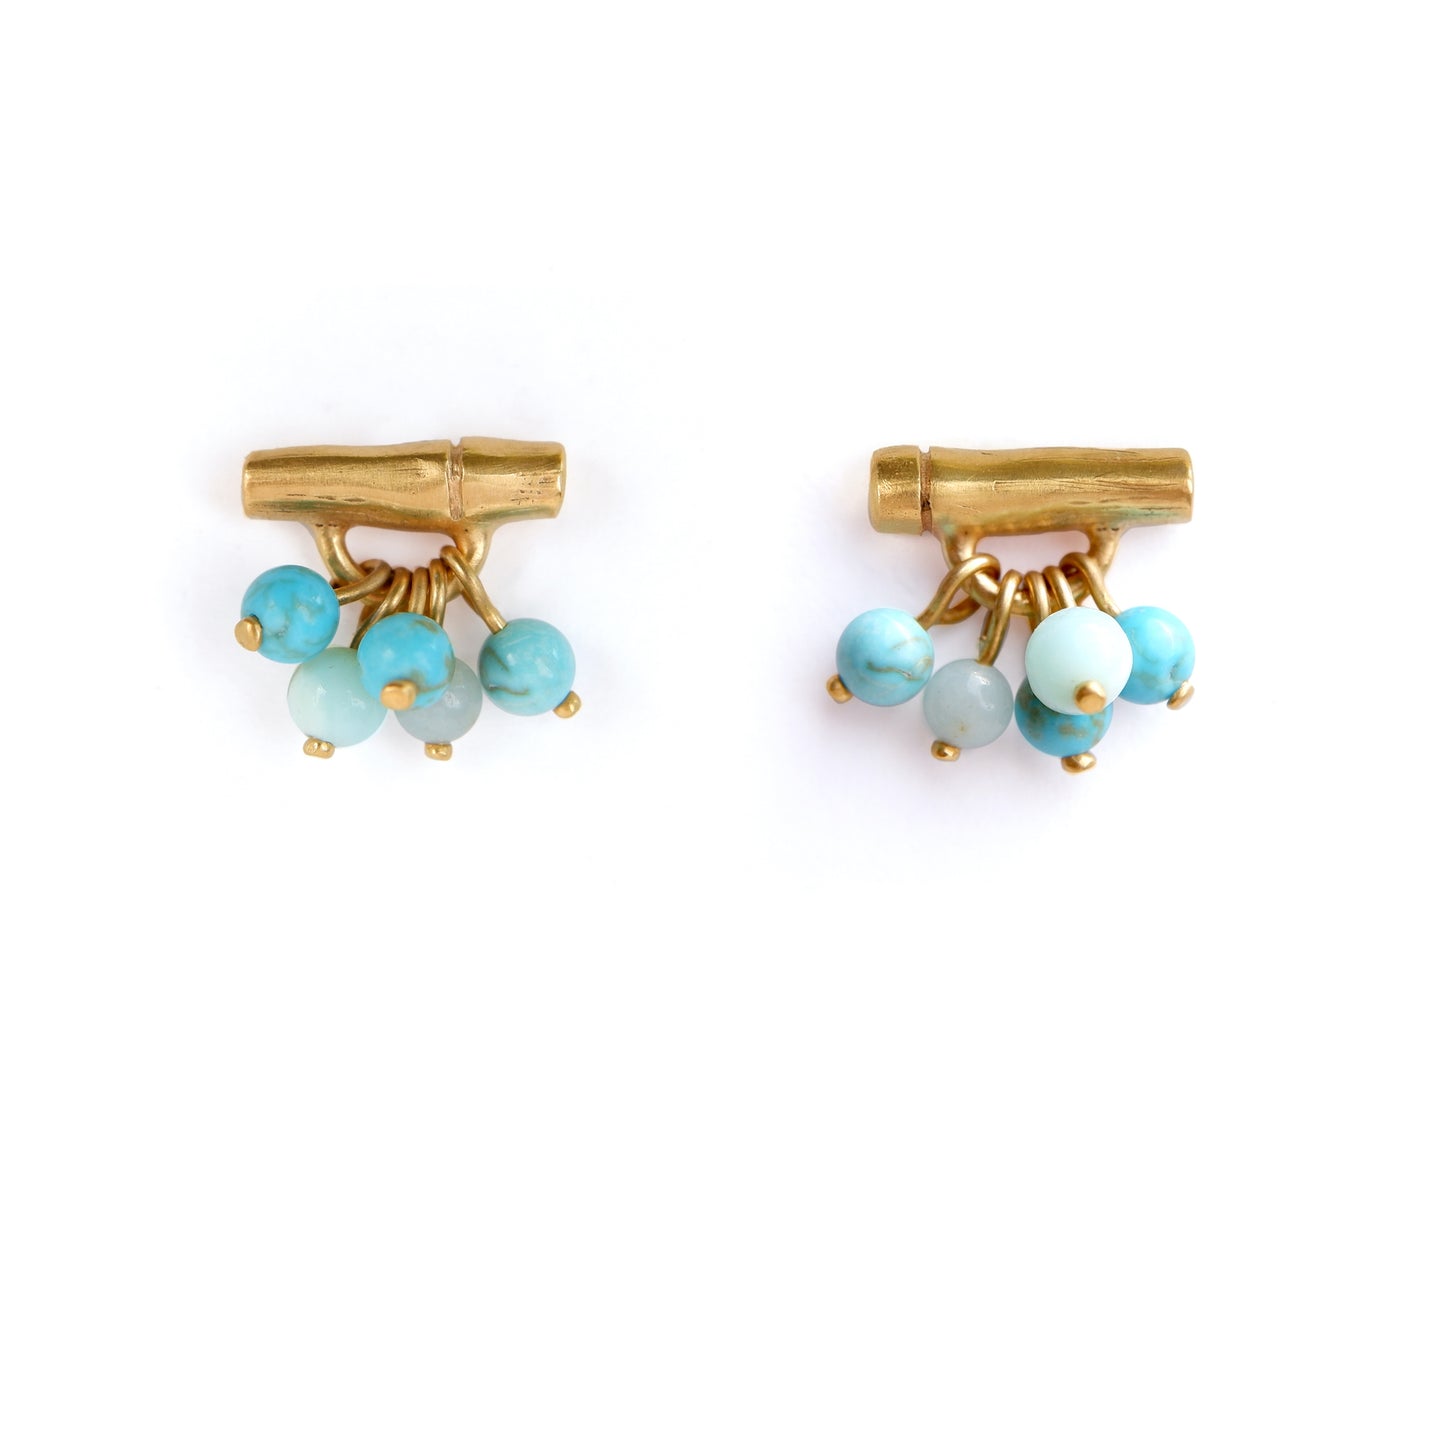 gold vermeil bamboo bar stud earrings with gemstone beads in turquoise & blue, white background